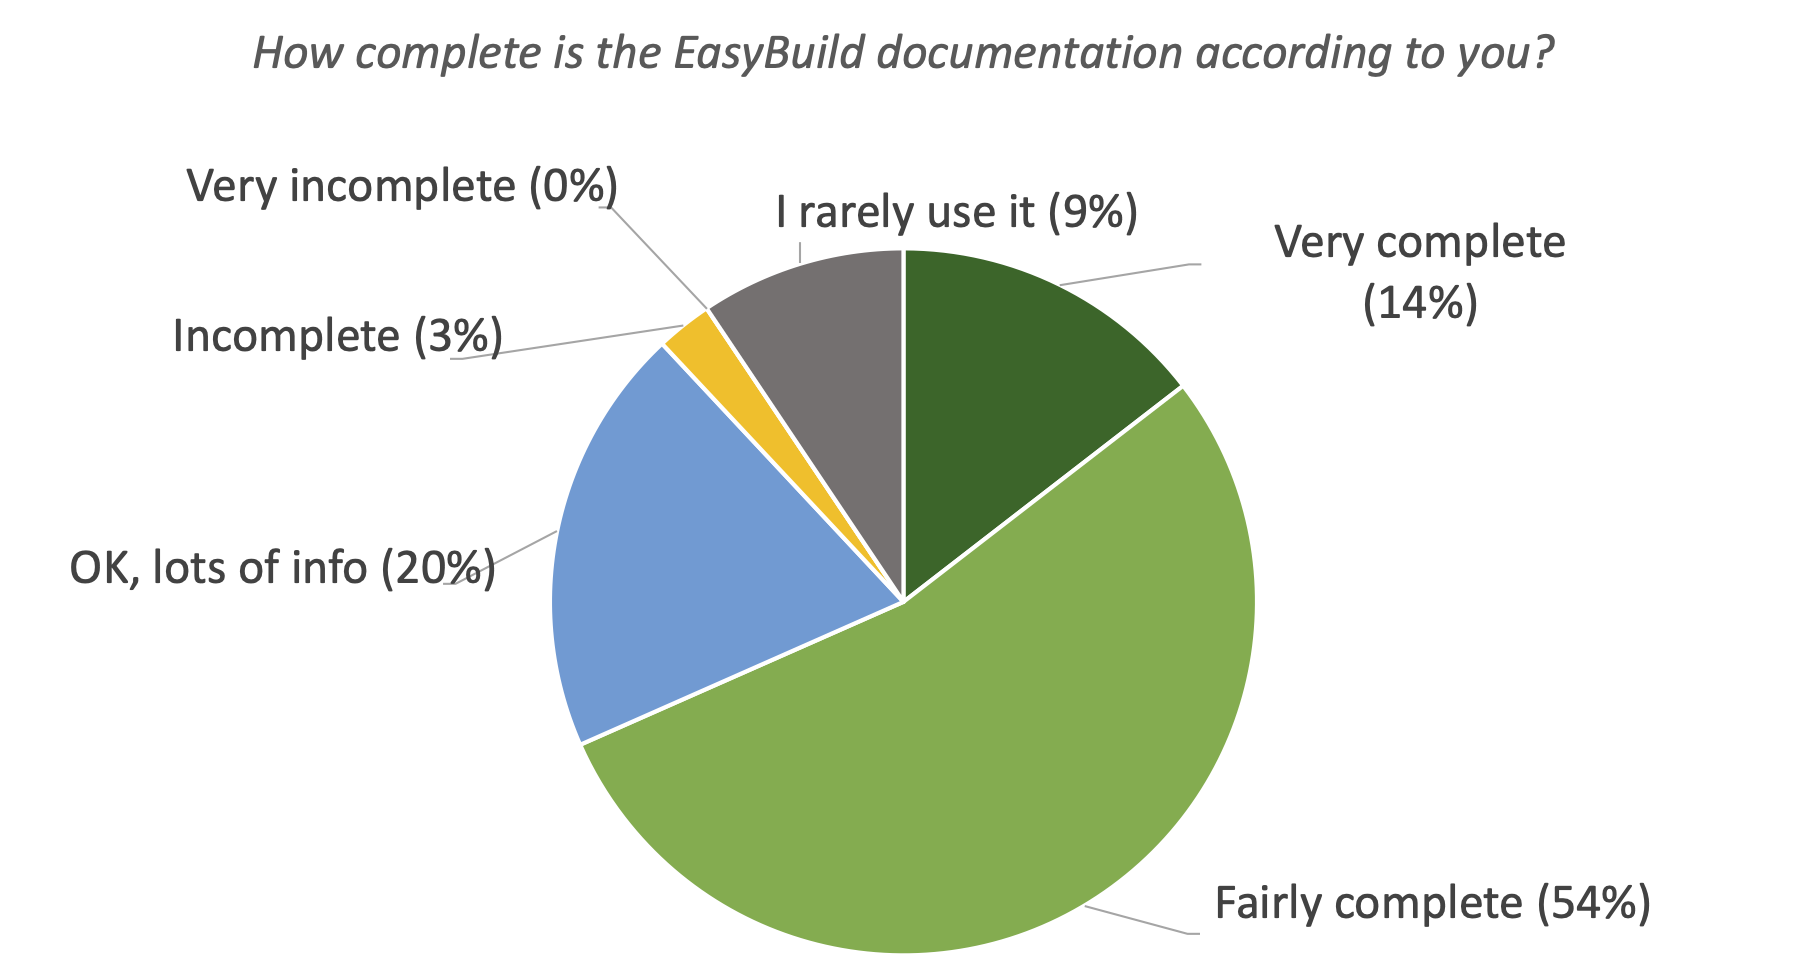 36. How complete is the EasyBuild documentation according to you?